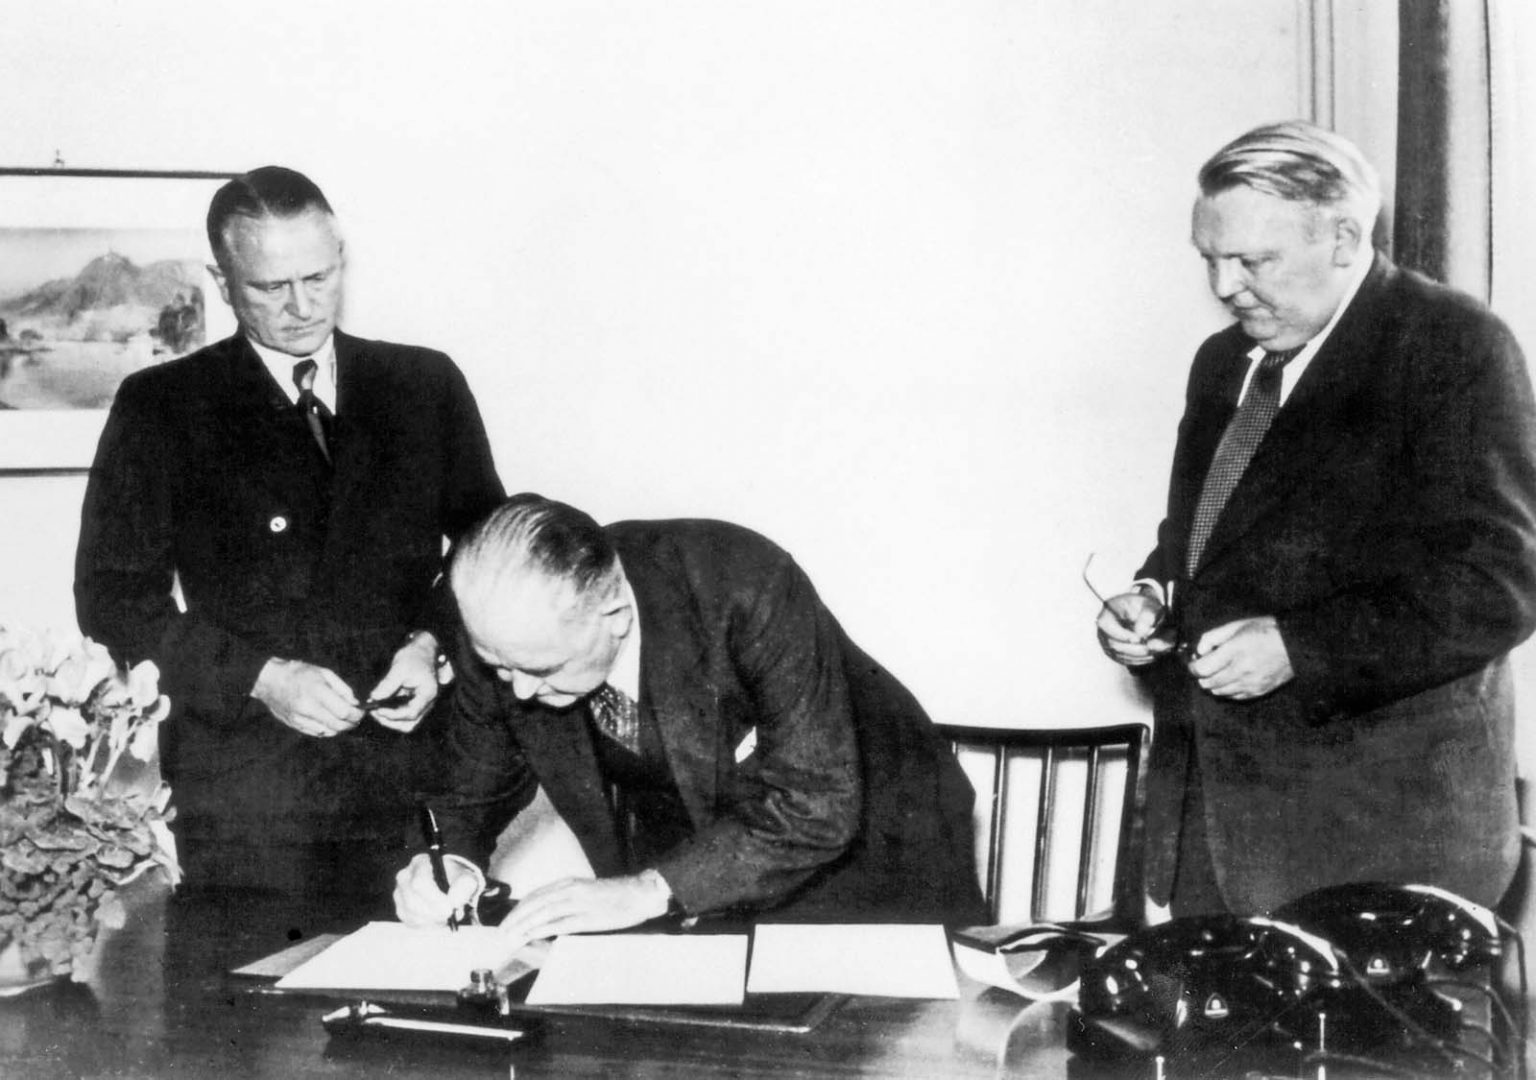 70 years ago, the United Kingdom handed over trustee-ship of Volkswagen to the German government.